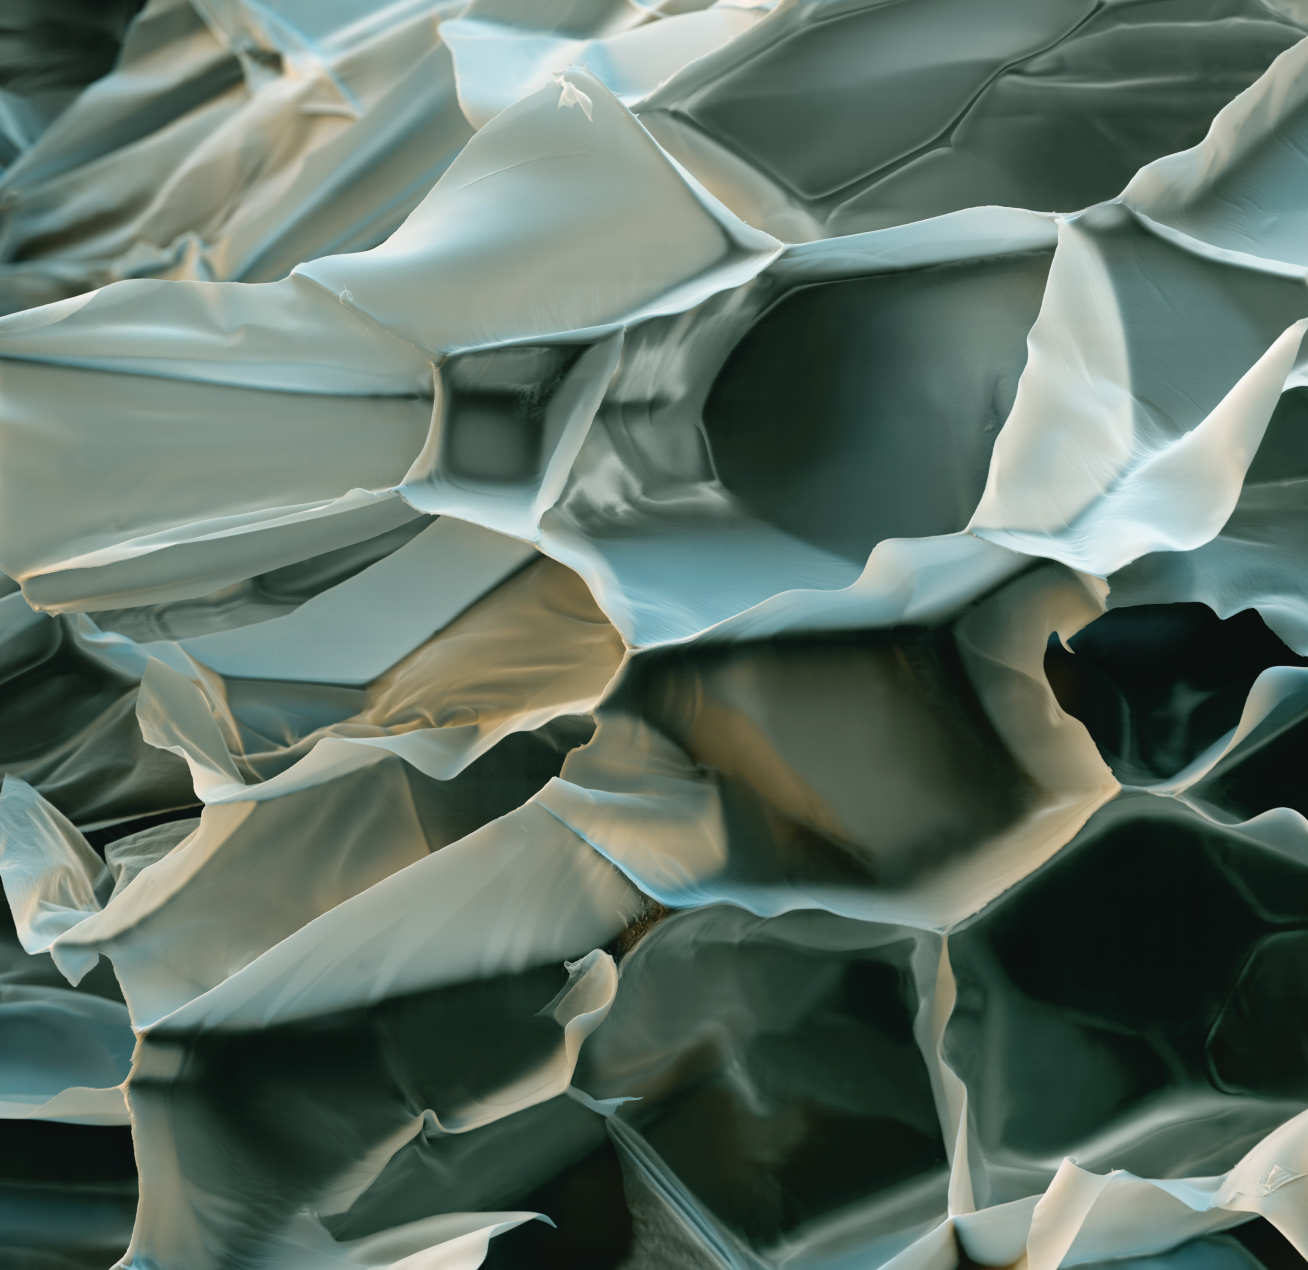 A coloured scanning electron micrograph of an extruded polystrene foam known as Styrodur insulating material